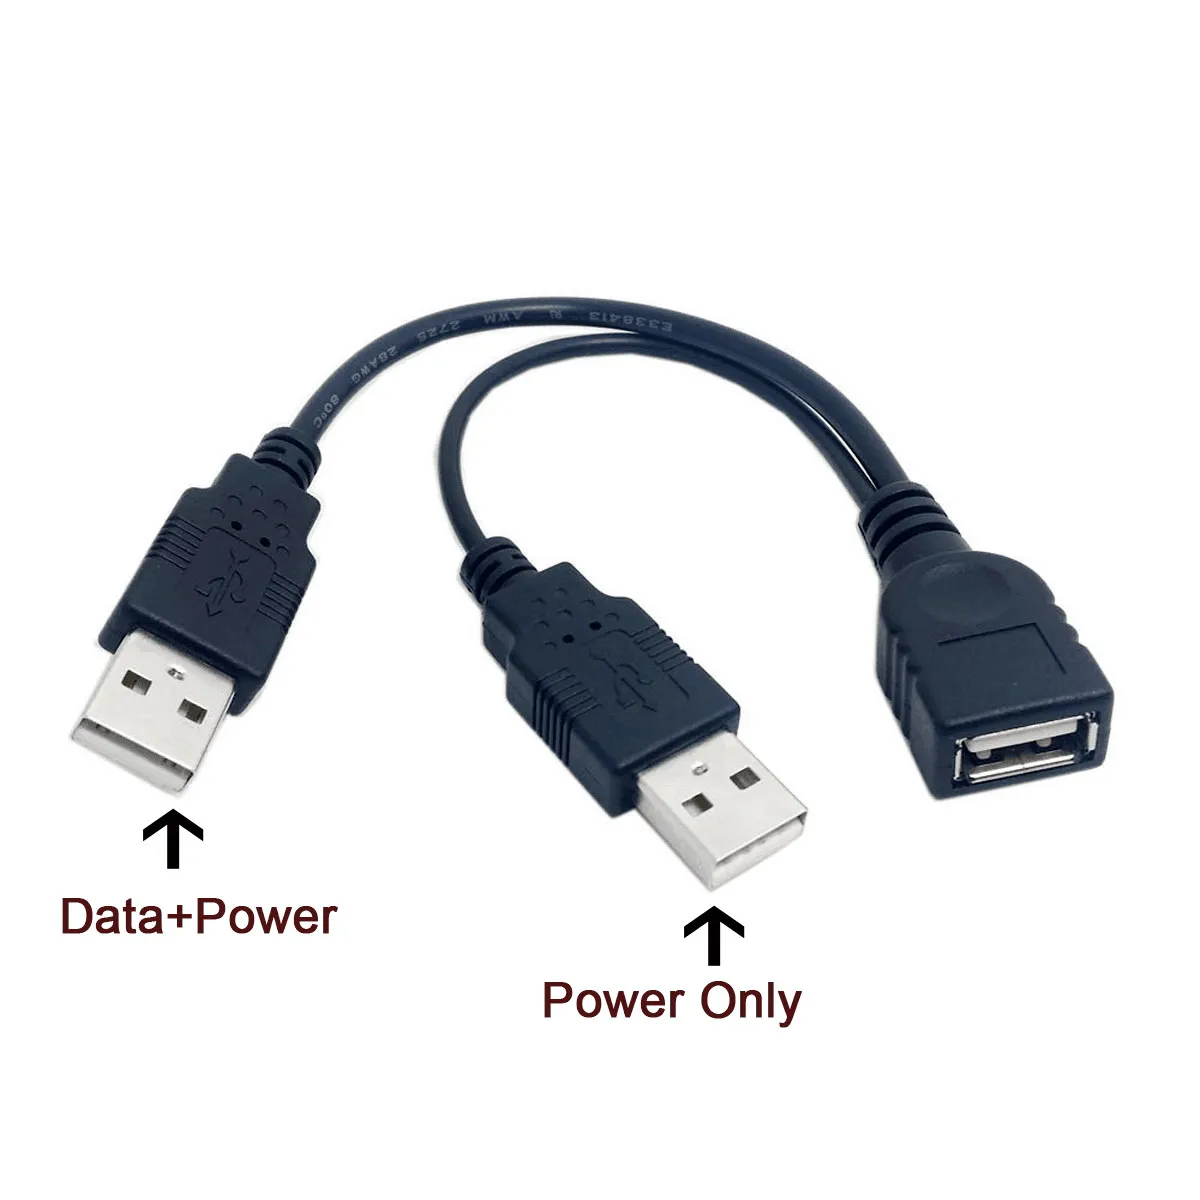 

CY USB to USB Extension Cable USB 2.0 Female A to Dual A Male Extra Power Data Y Extension Cable for 2.5" Mobile Hard Disk